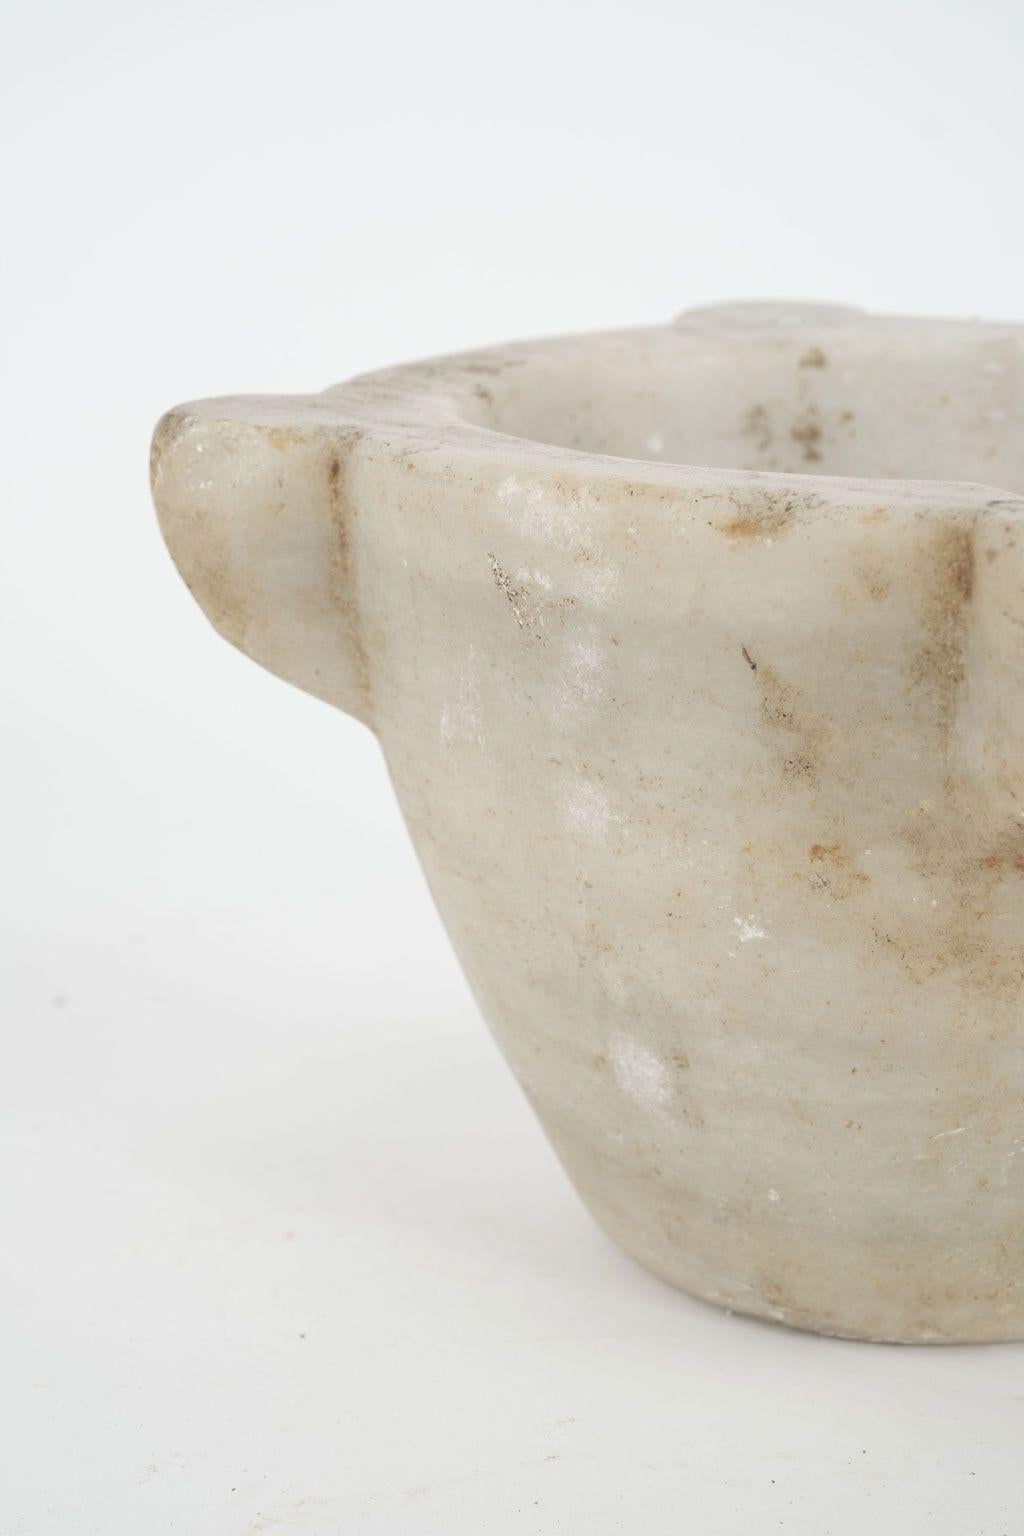 19th century stone mortar from France. Hand-carved alabaster mortar in a conical shape with four handles. One handle notched with a channel for pouring. Beautiful as a sculptural accent piece or decorative bowl. Seven stone mortars of varying shapes